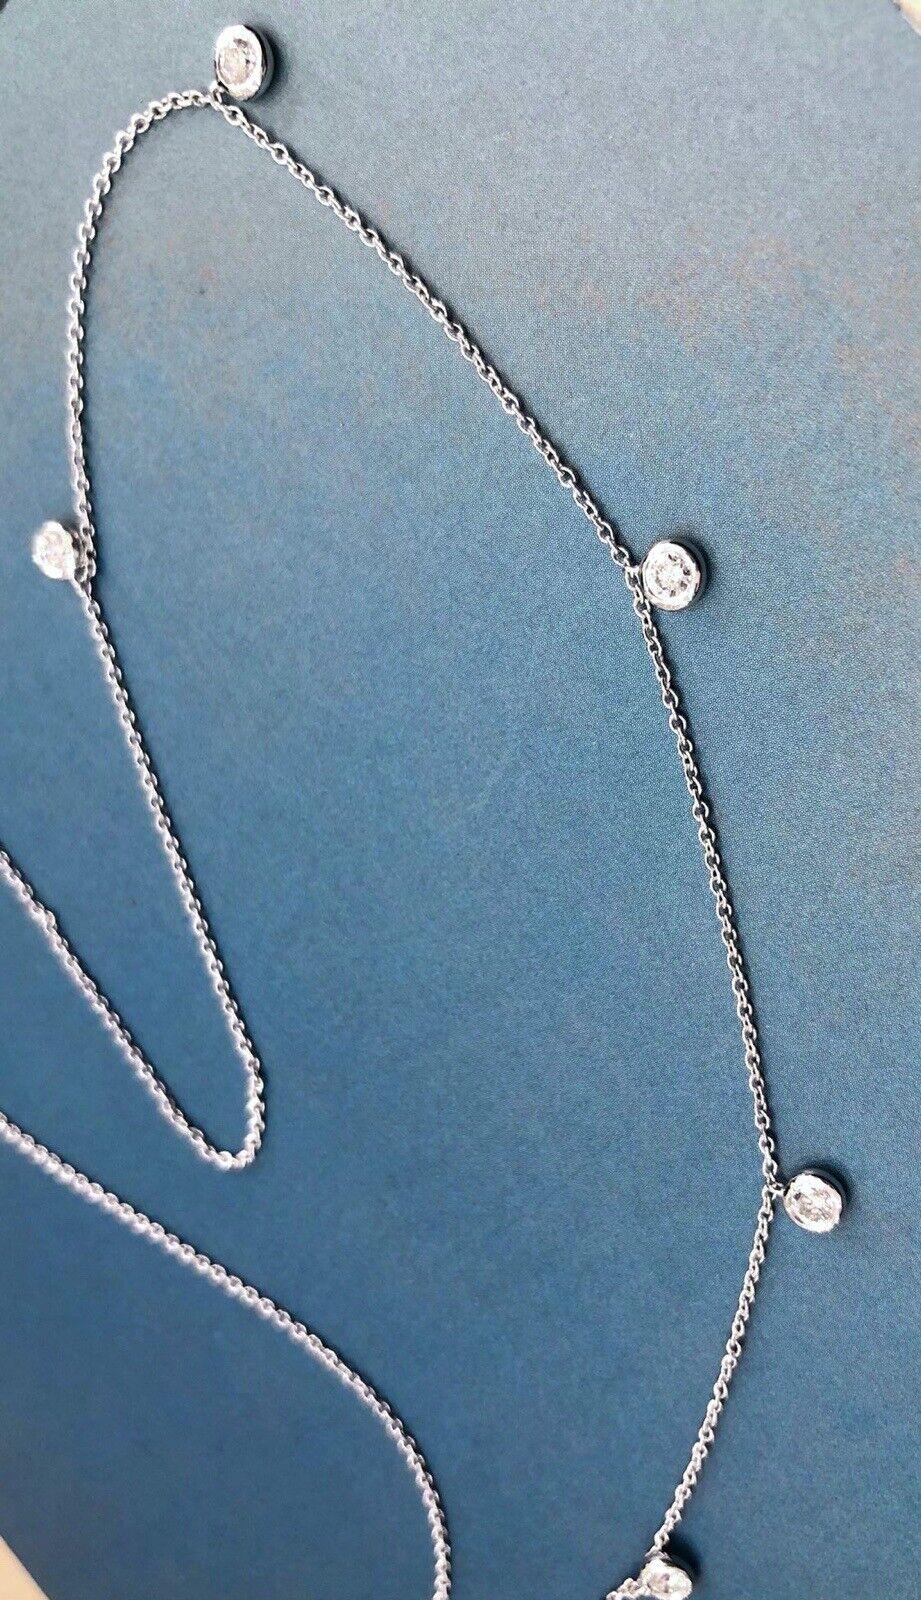 A delicate raindrop necklace with bezel set diamonds all across the necklace

Classic and dazzling

0.25ct combined weight

A gorgeous piece straight from heart of London Hatton garden at exceptional price

SI1 clarity - fiery and very sparkling.